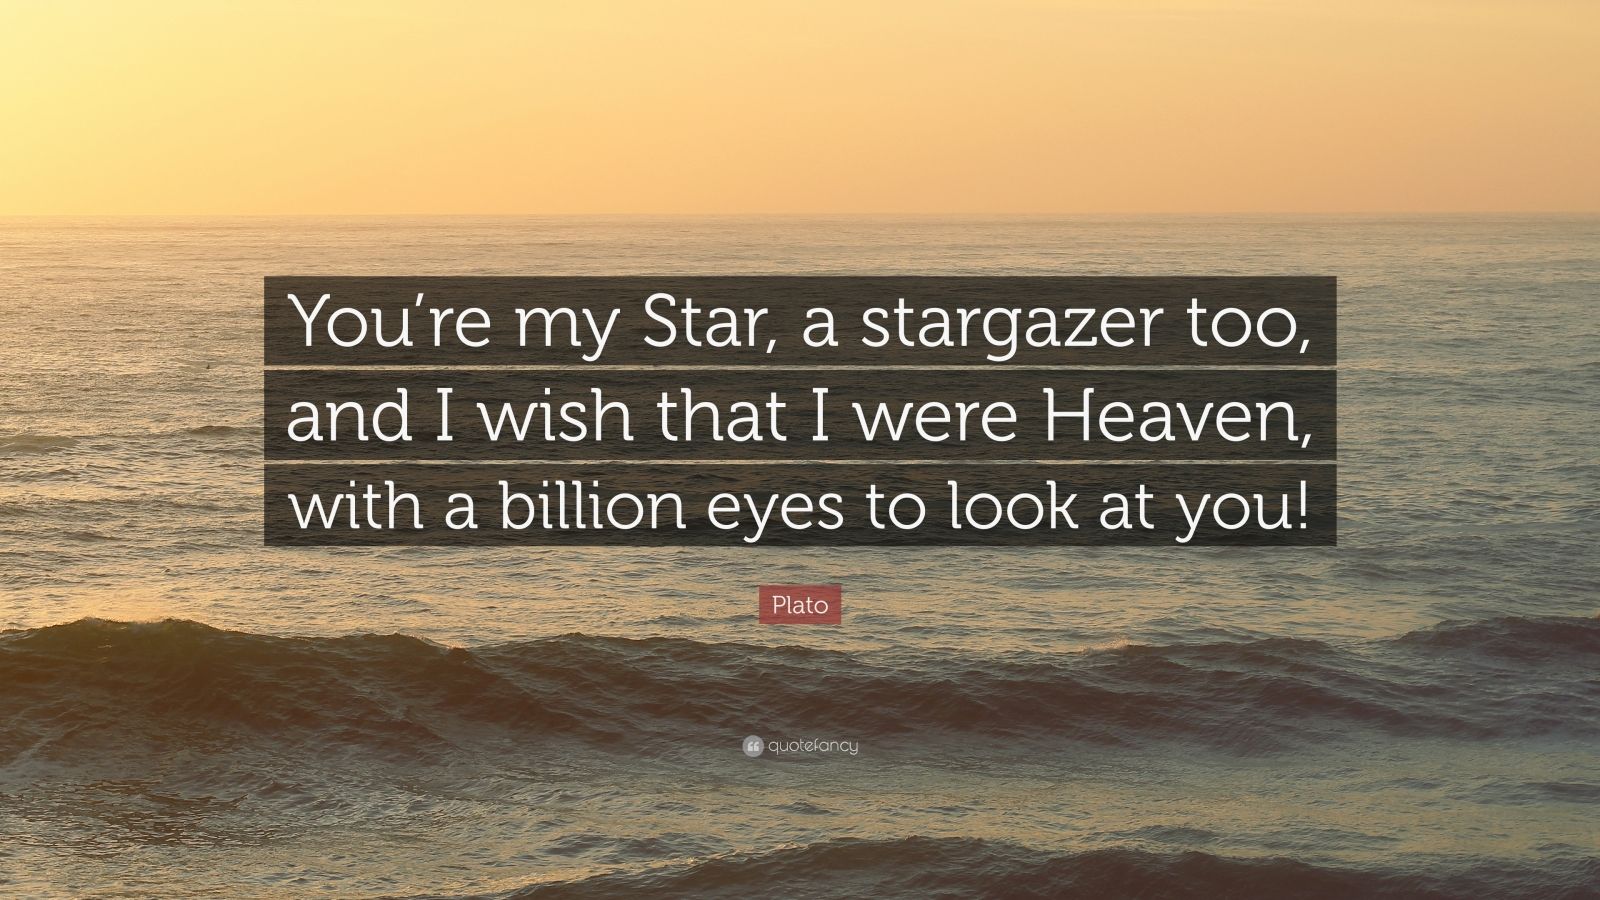 Plato Quote: "You're my Star, a stargazer too, and I wish ...